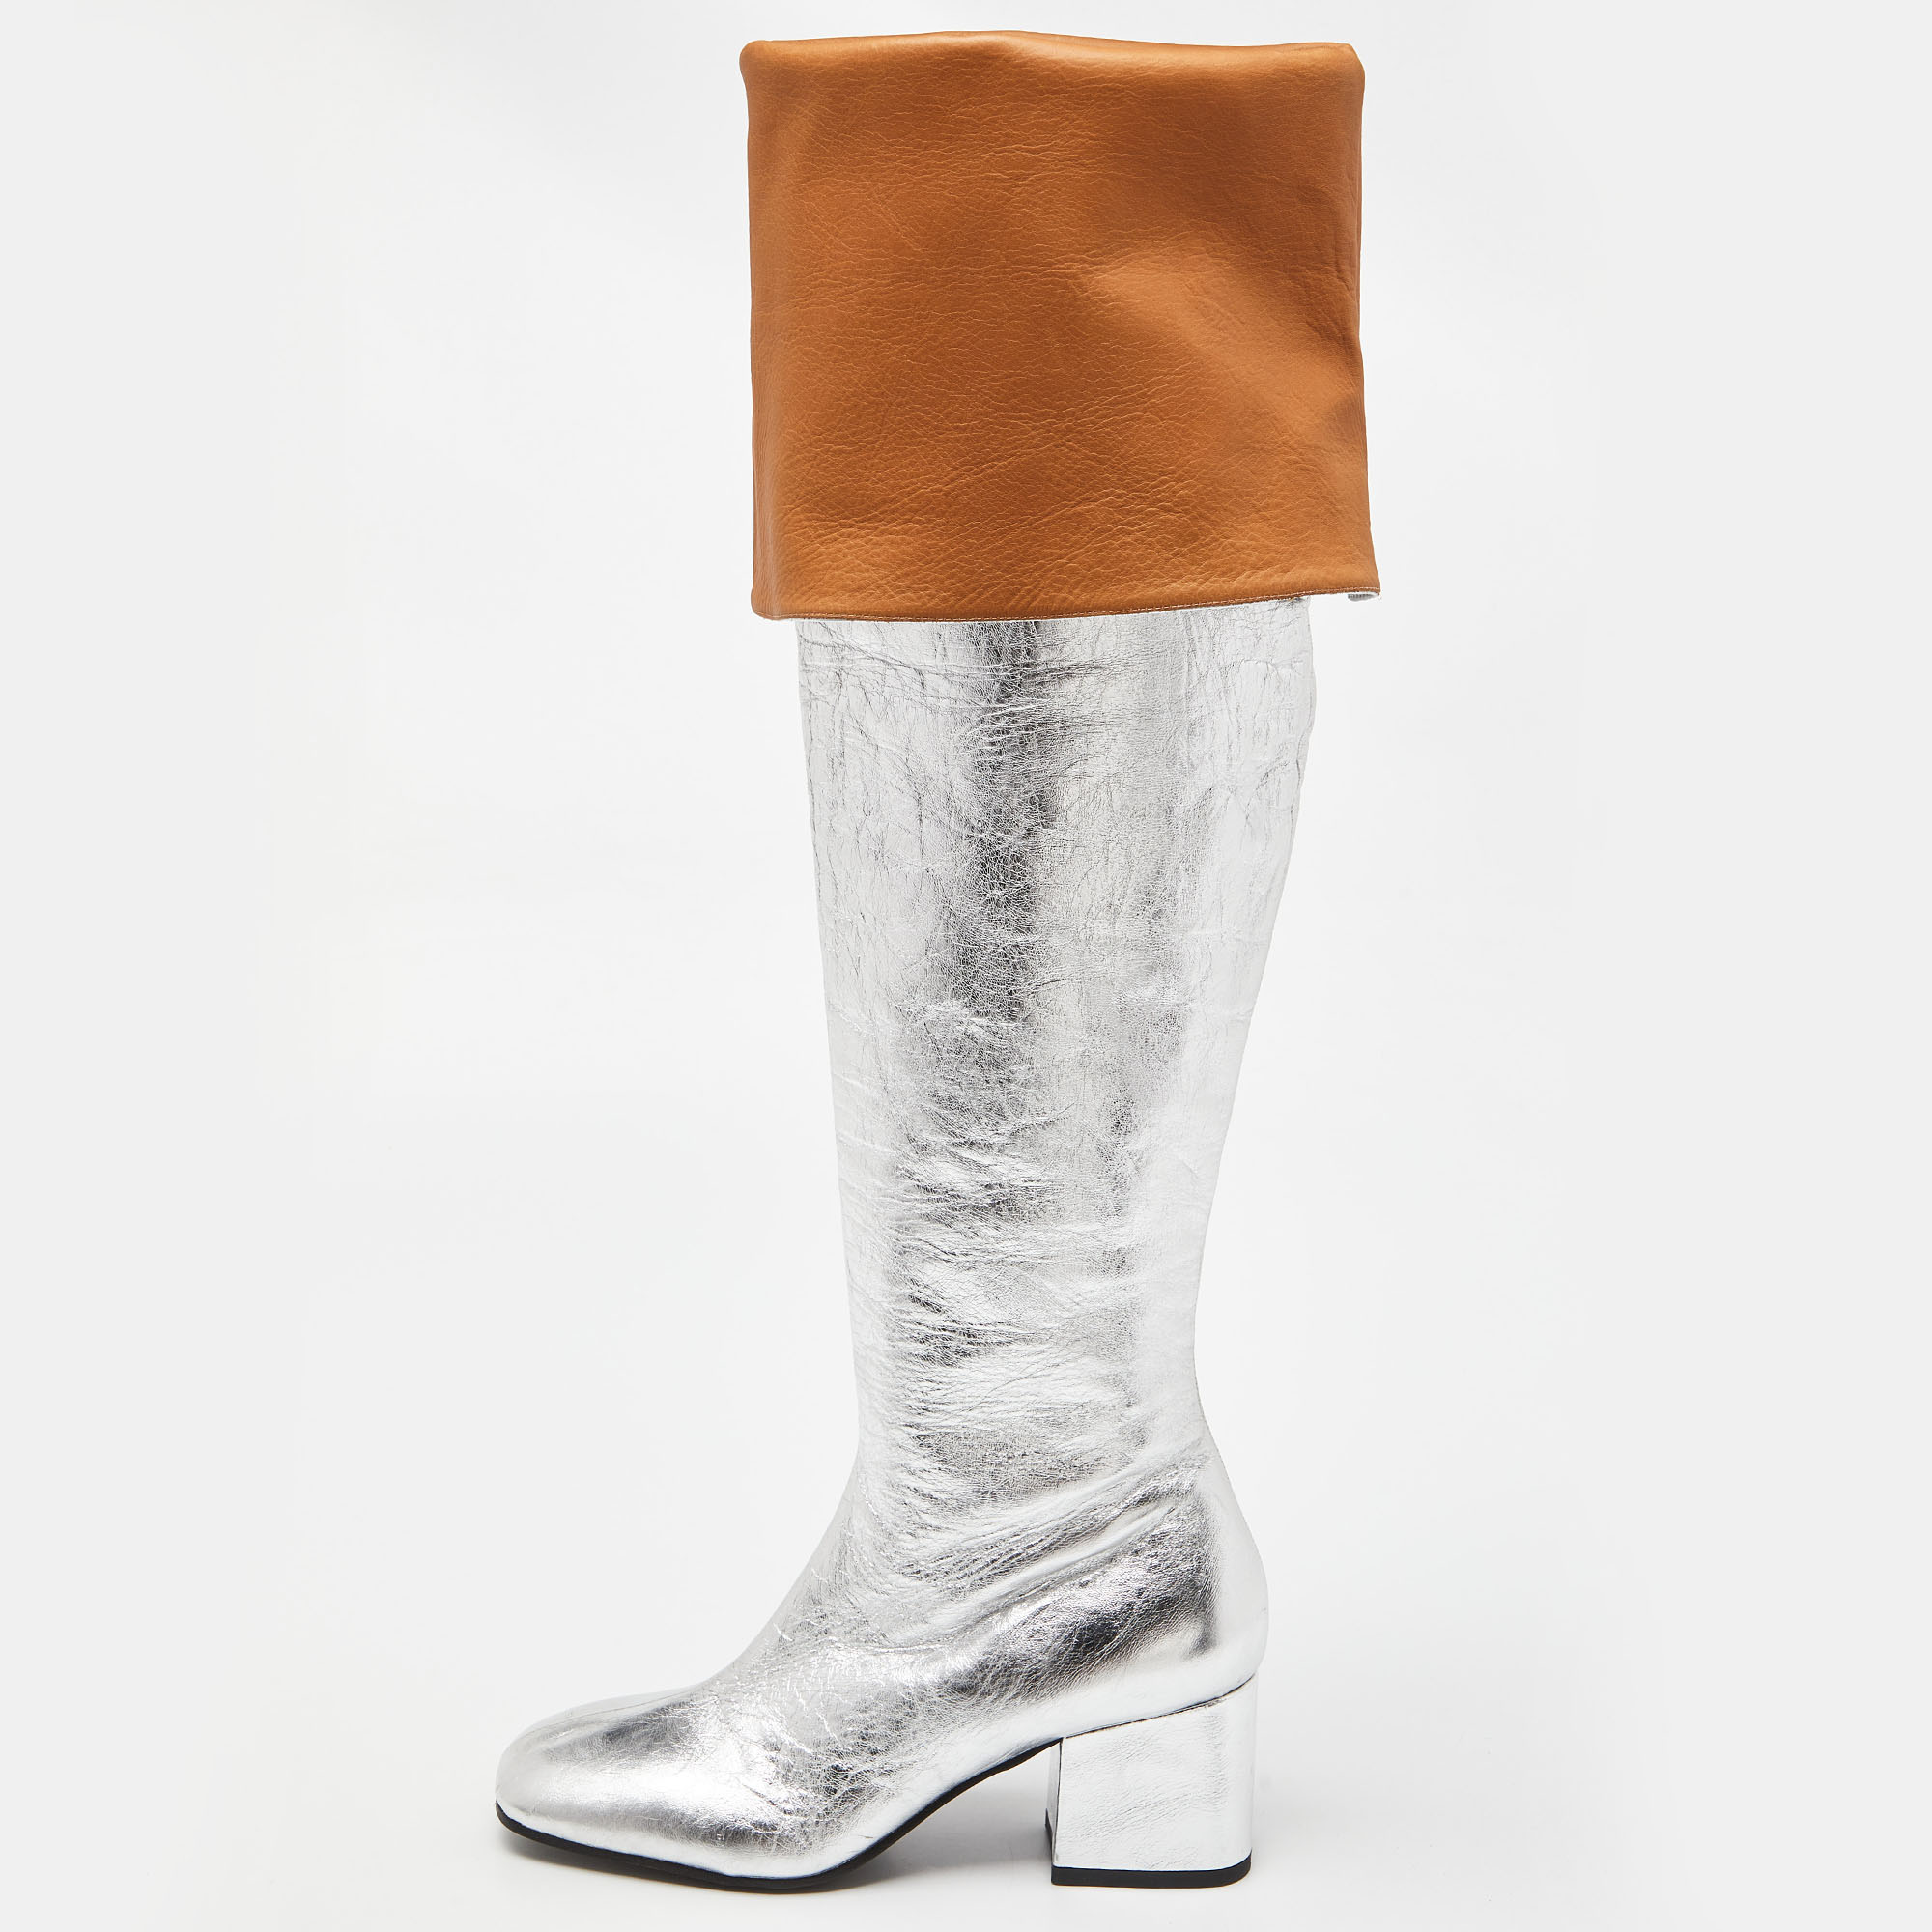 Marni silver leather over the knee boots size 40